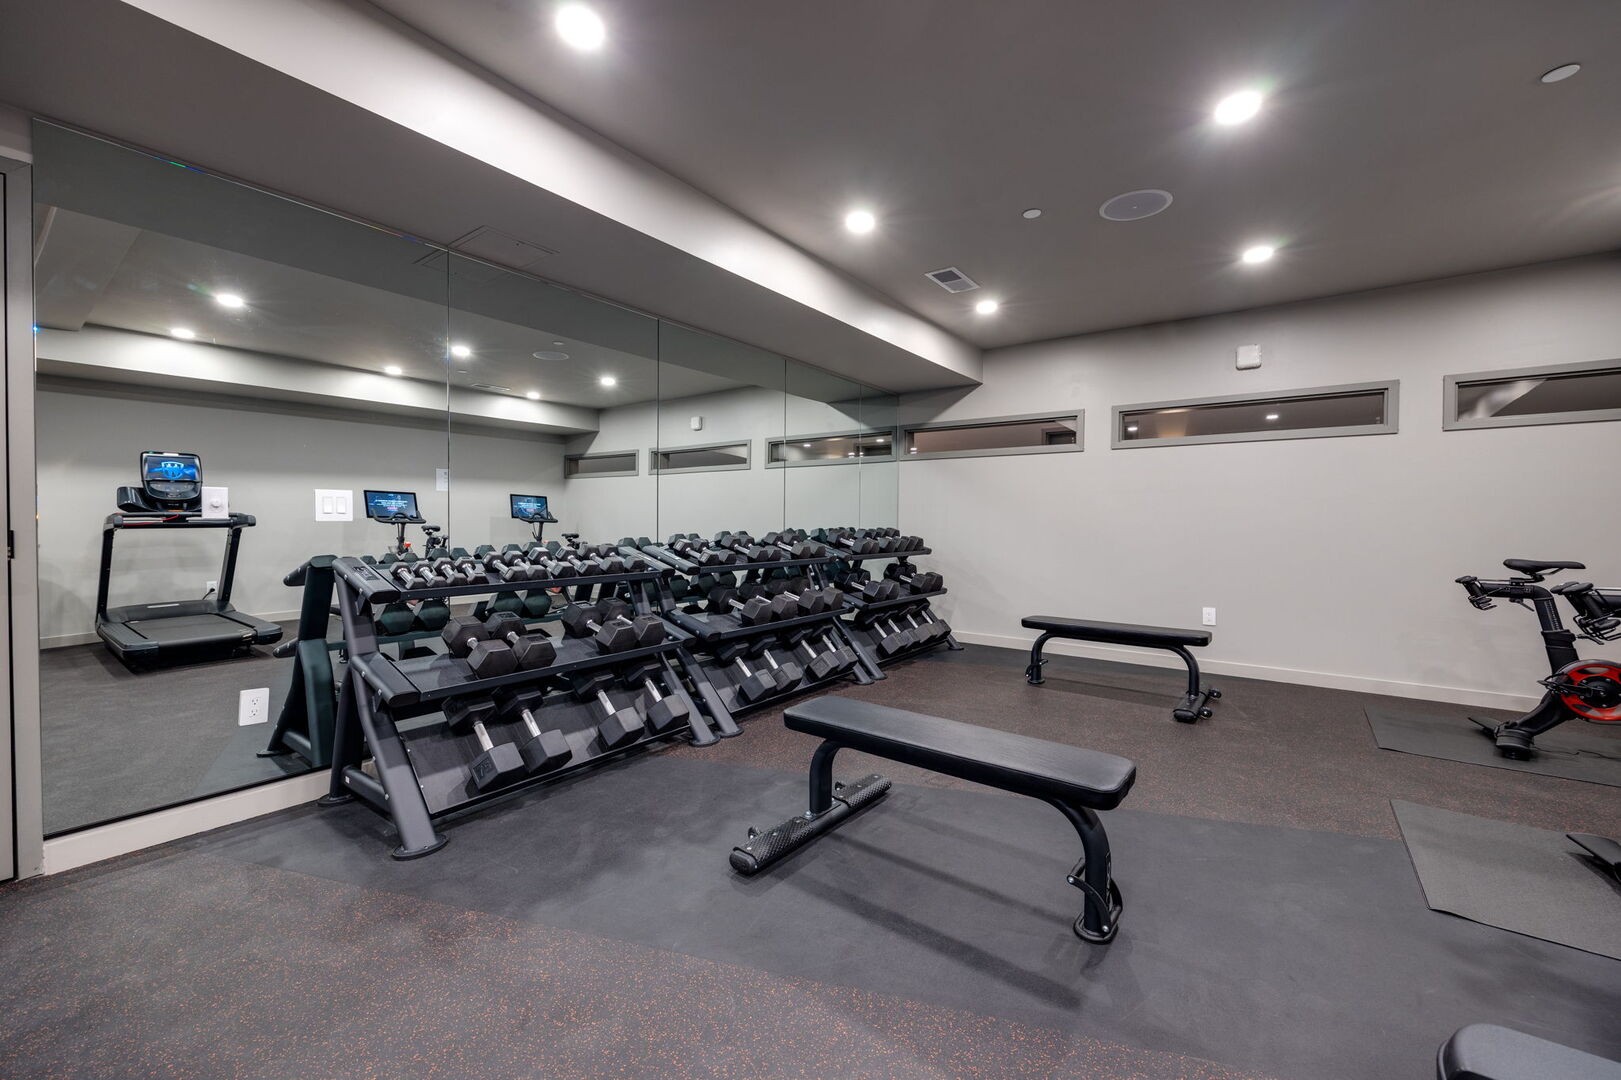 Communal Area: Gym offering a wide range of workout equipment, and a Smart TV.